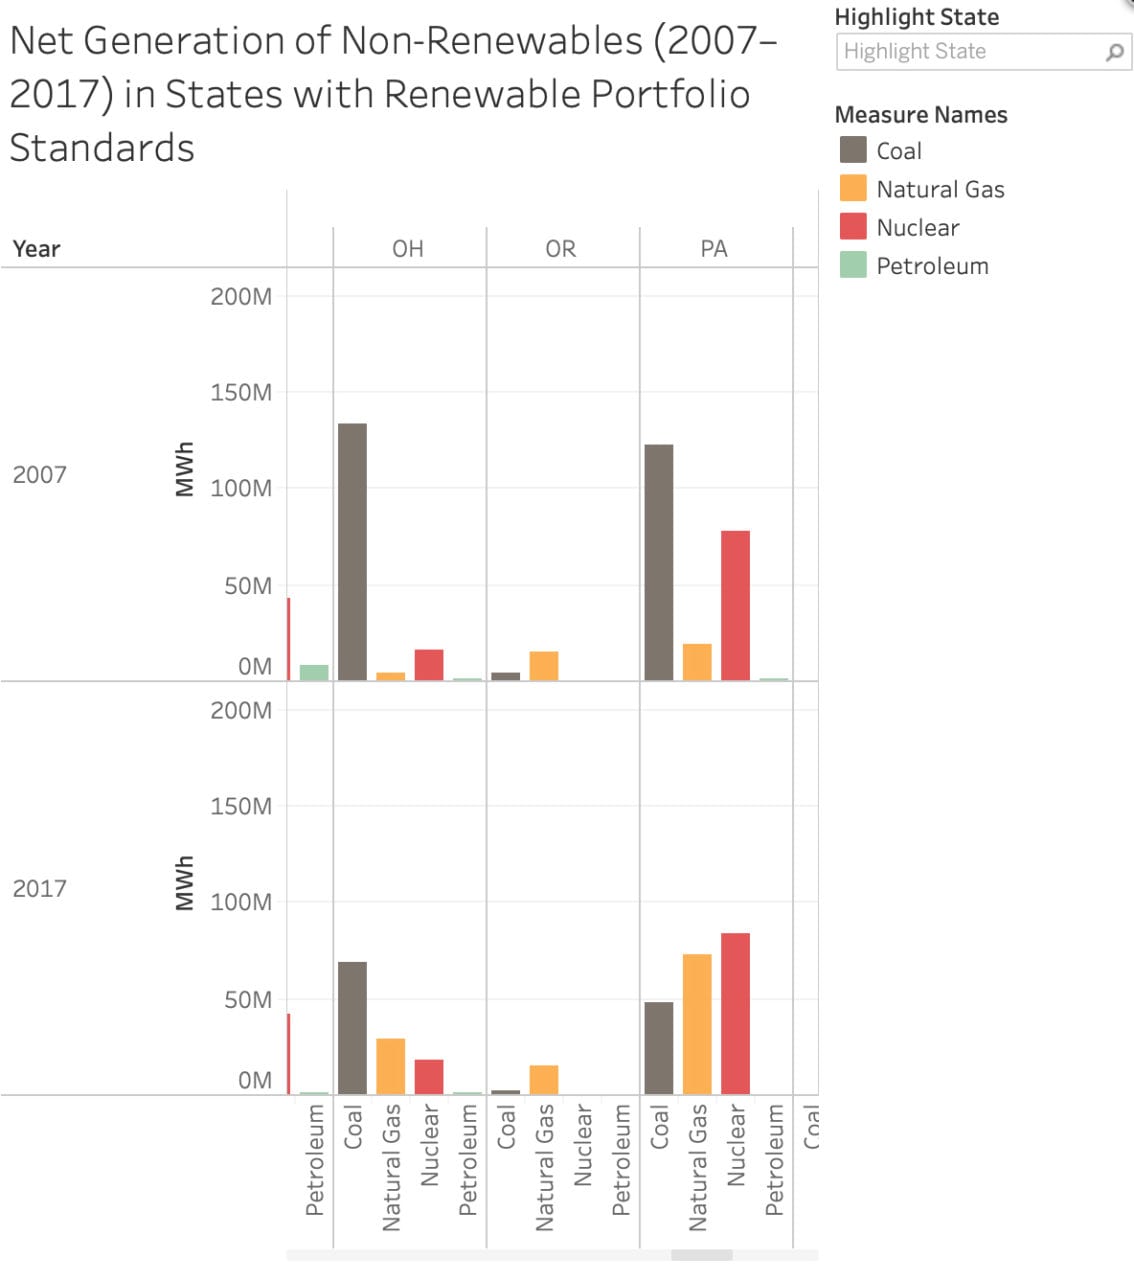 How Net Generation Has Changed in States with Renewable Portfolio Standards